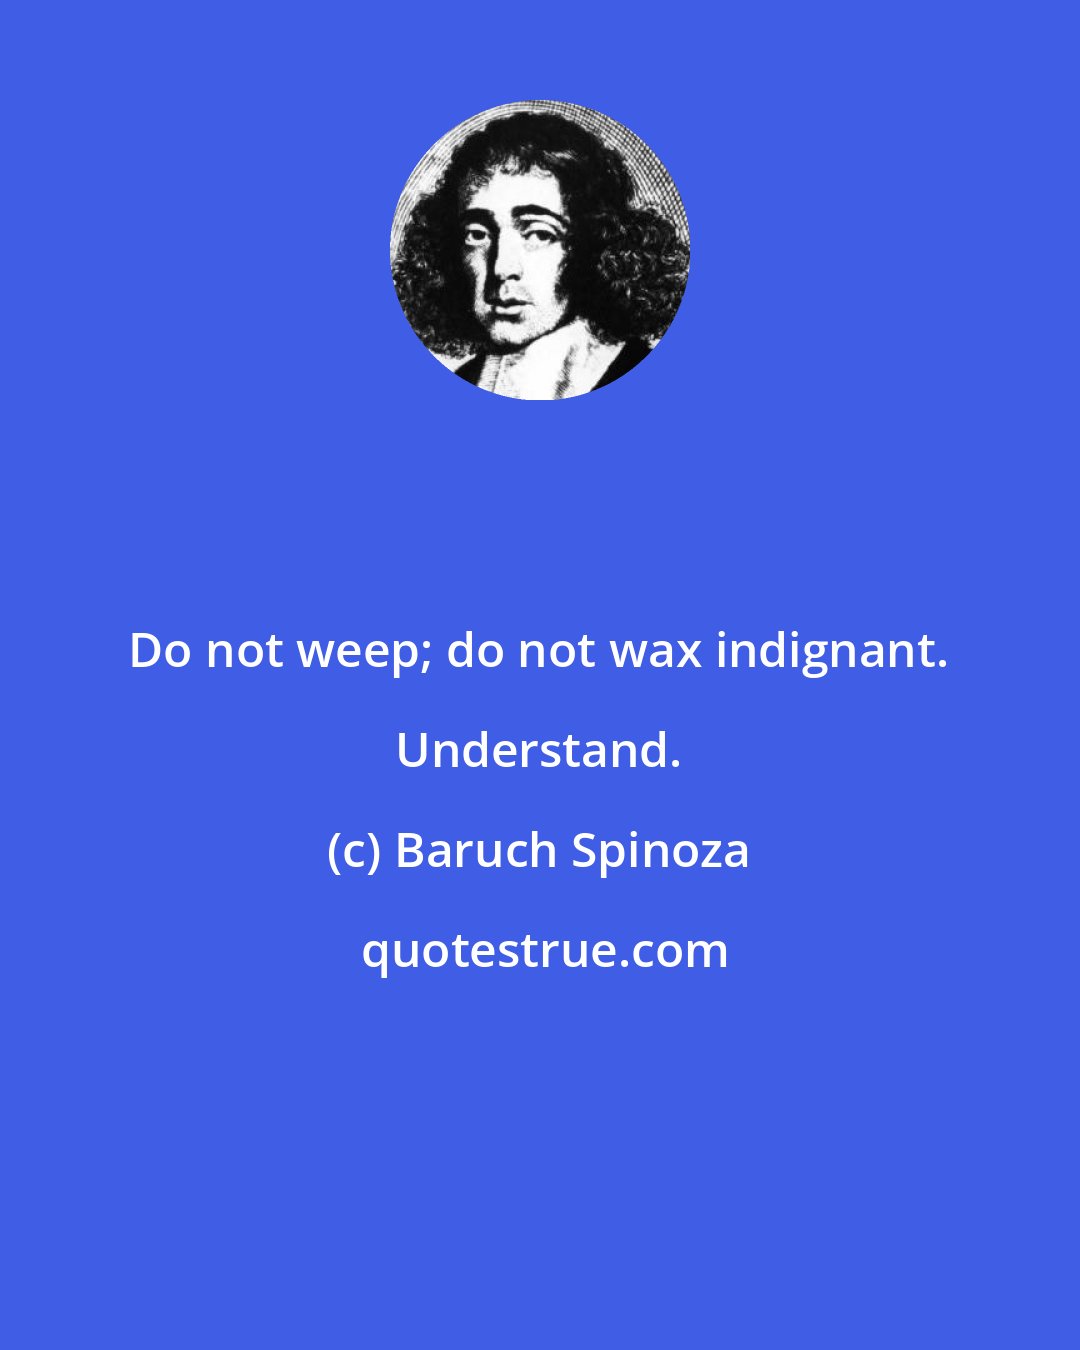 Baruch Spinoza: Do not weep; do not wax indignant. Understand.